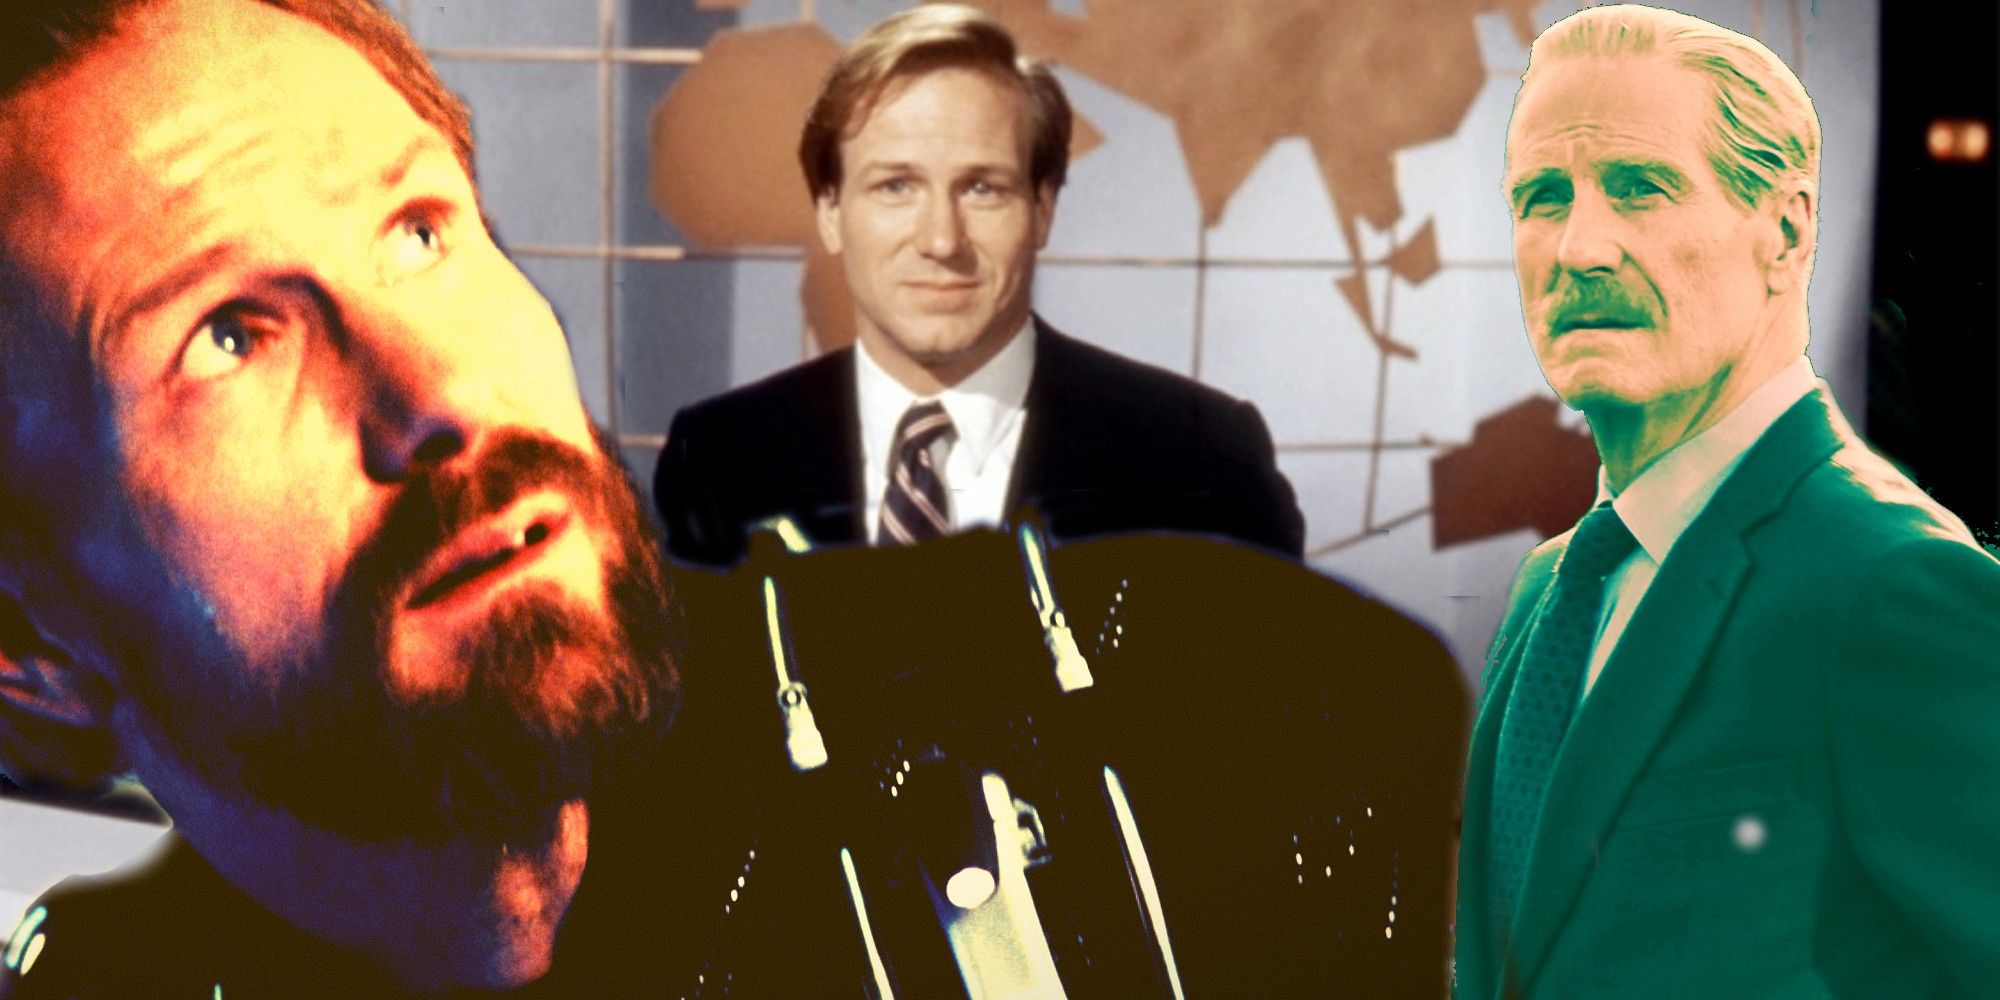 Collage of William Hurt in Lost in Space, Broadcast News, and Captain America: Civil War